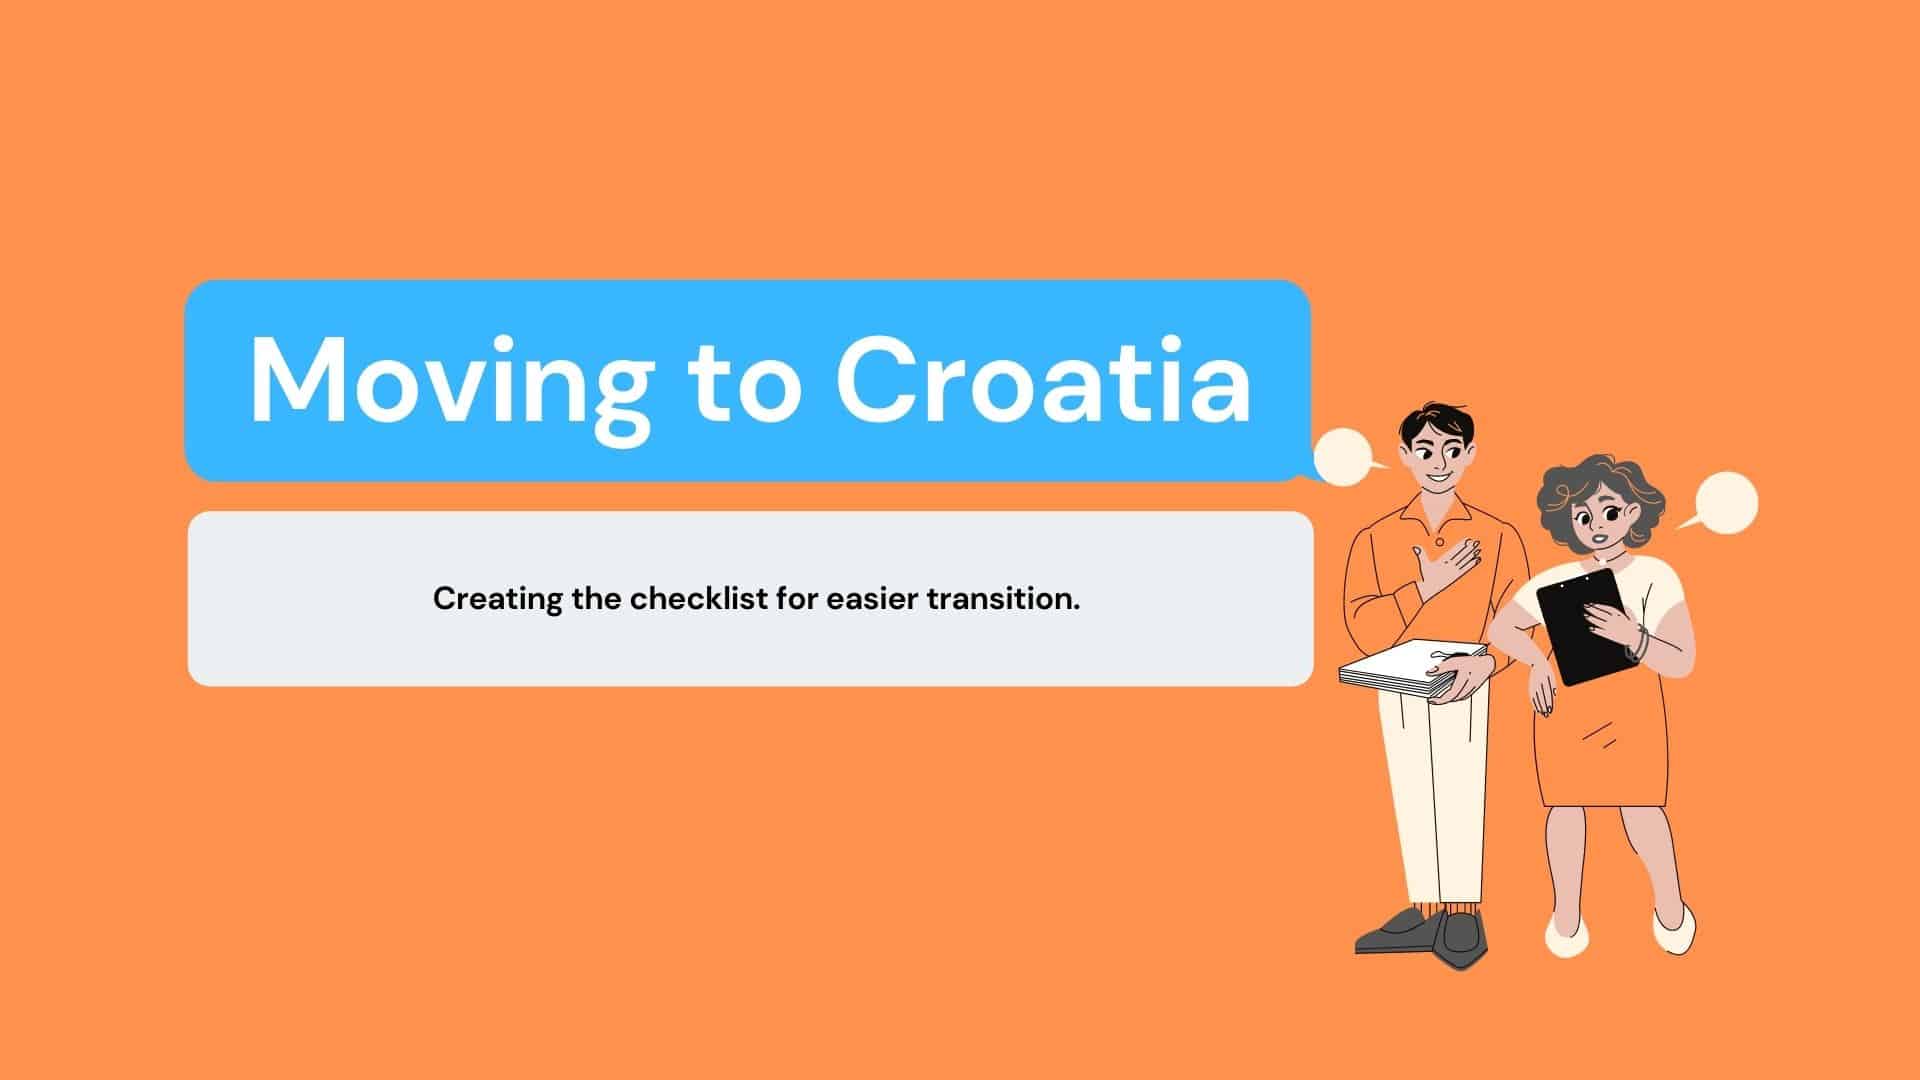 The infographic with two illustrated people showing how to put a checklist for a smooth move to Croatia.